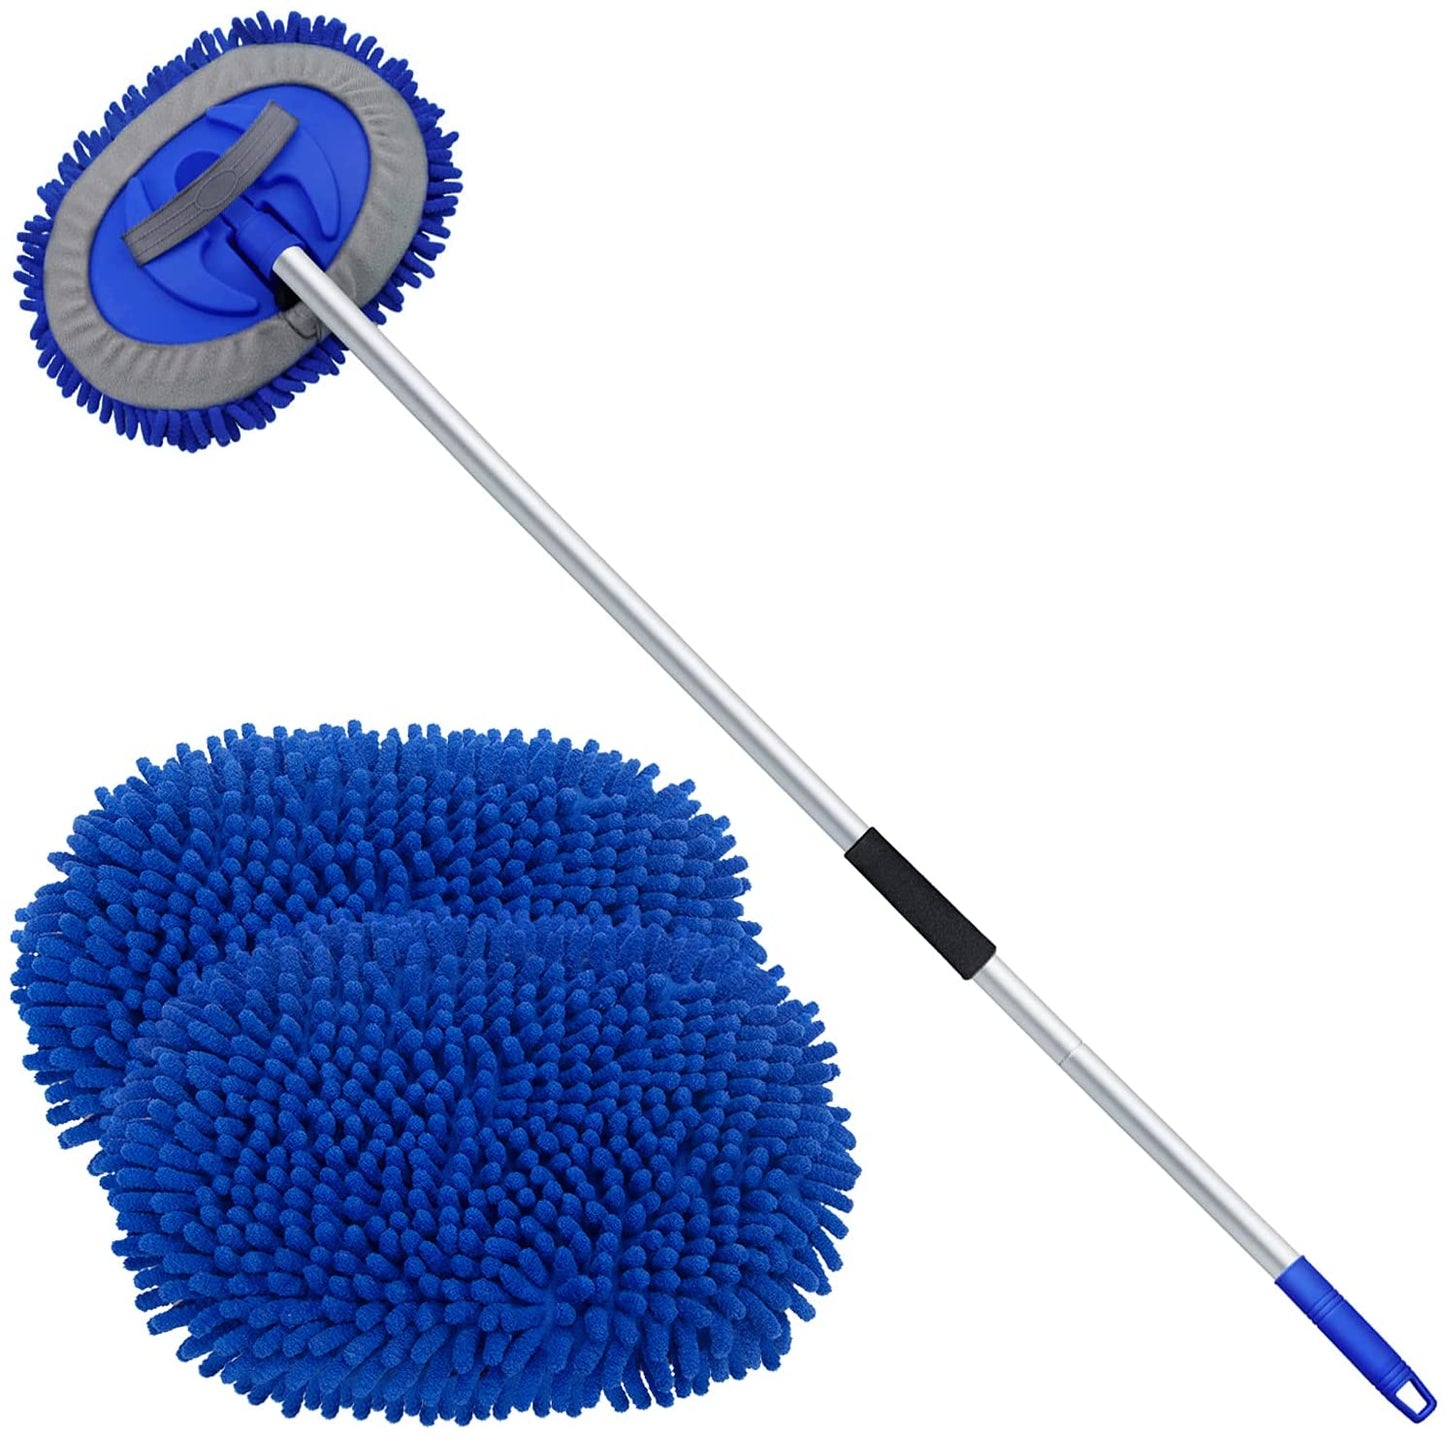 62" Microfiber Car Wash Brush Mop Kit Mitt Sponge with Long Handle Car Cleaning Supplies Kit Duster Washing Car Tools Accessories, 1 Chenille Scratch-Free Replacement Head Aluminum Alloy Pole